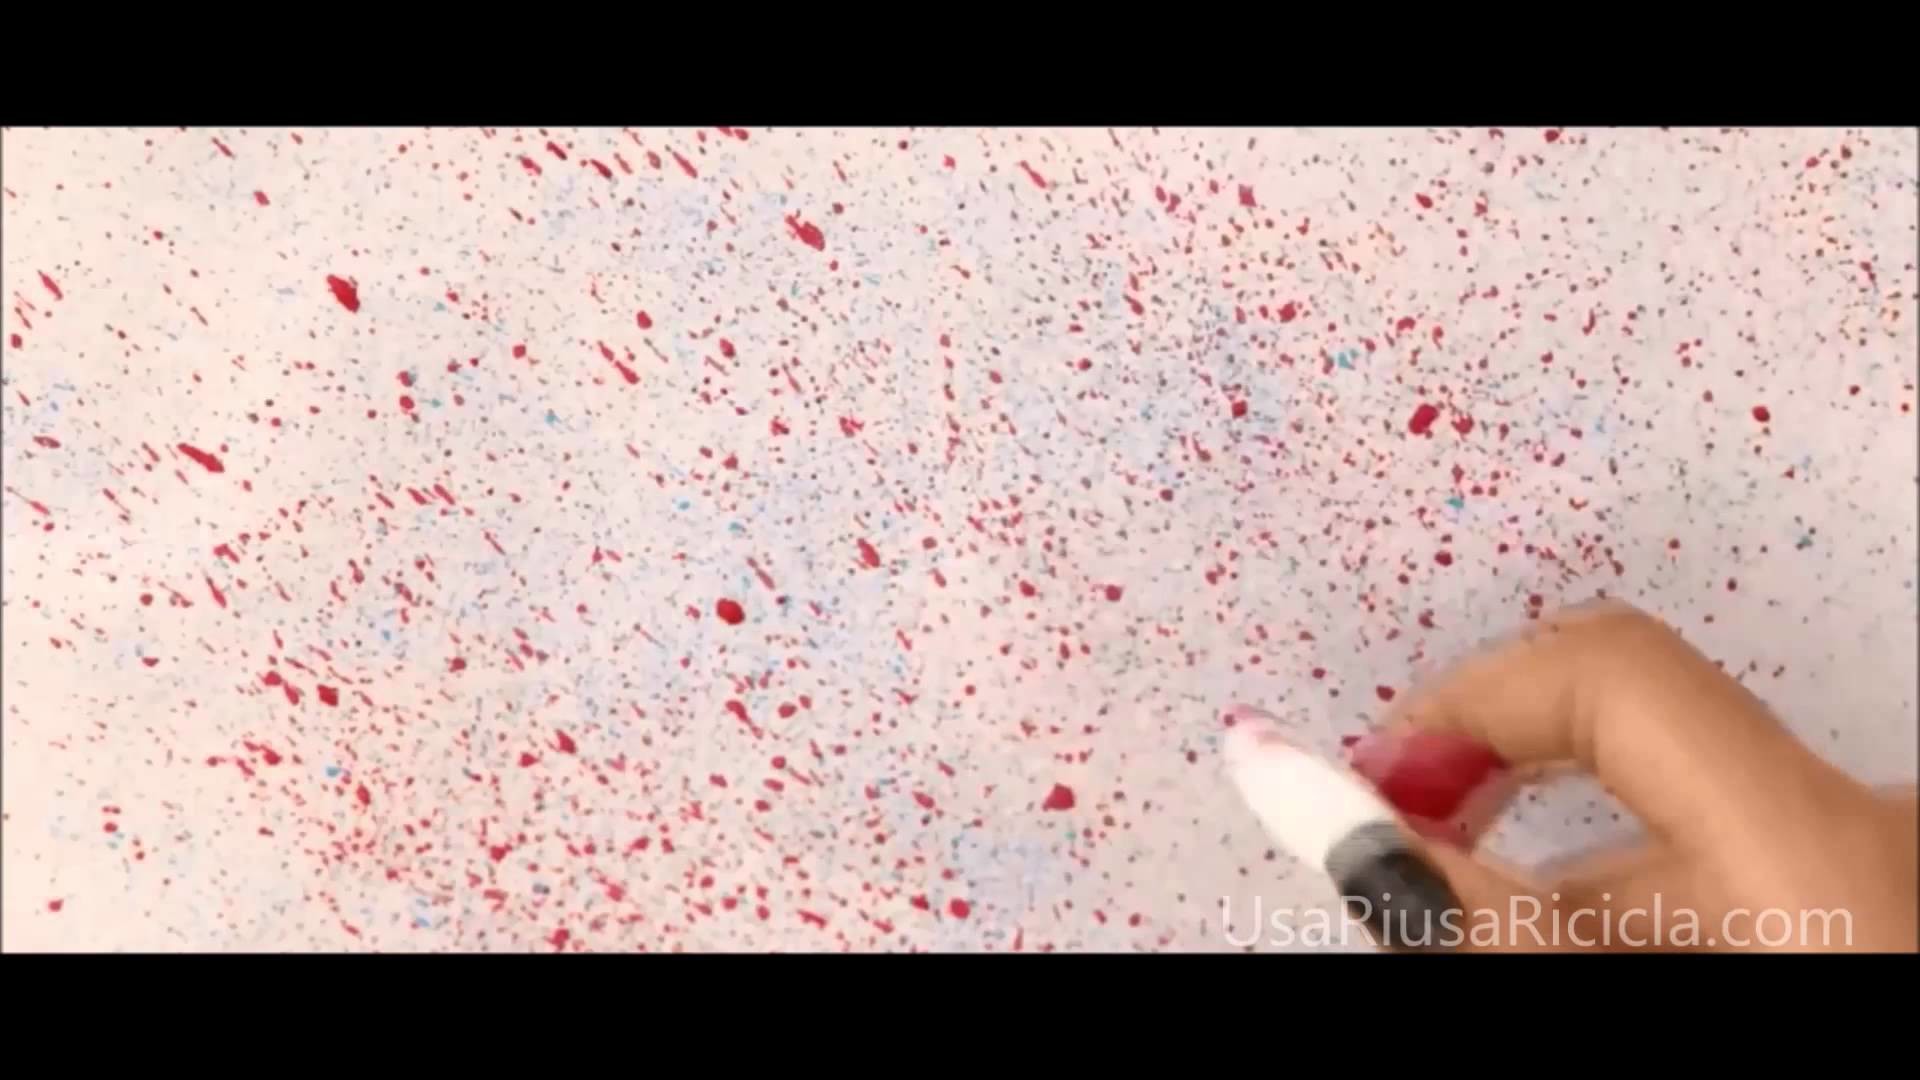 Toothbrush painting wrapping paper - UsaRiusaRicicla